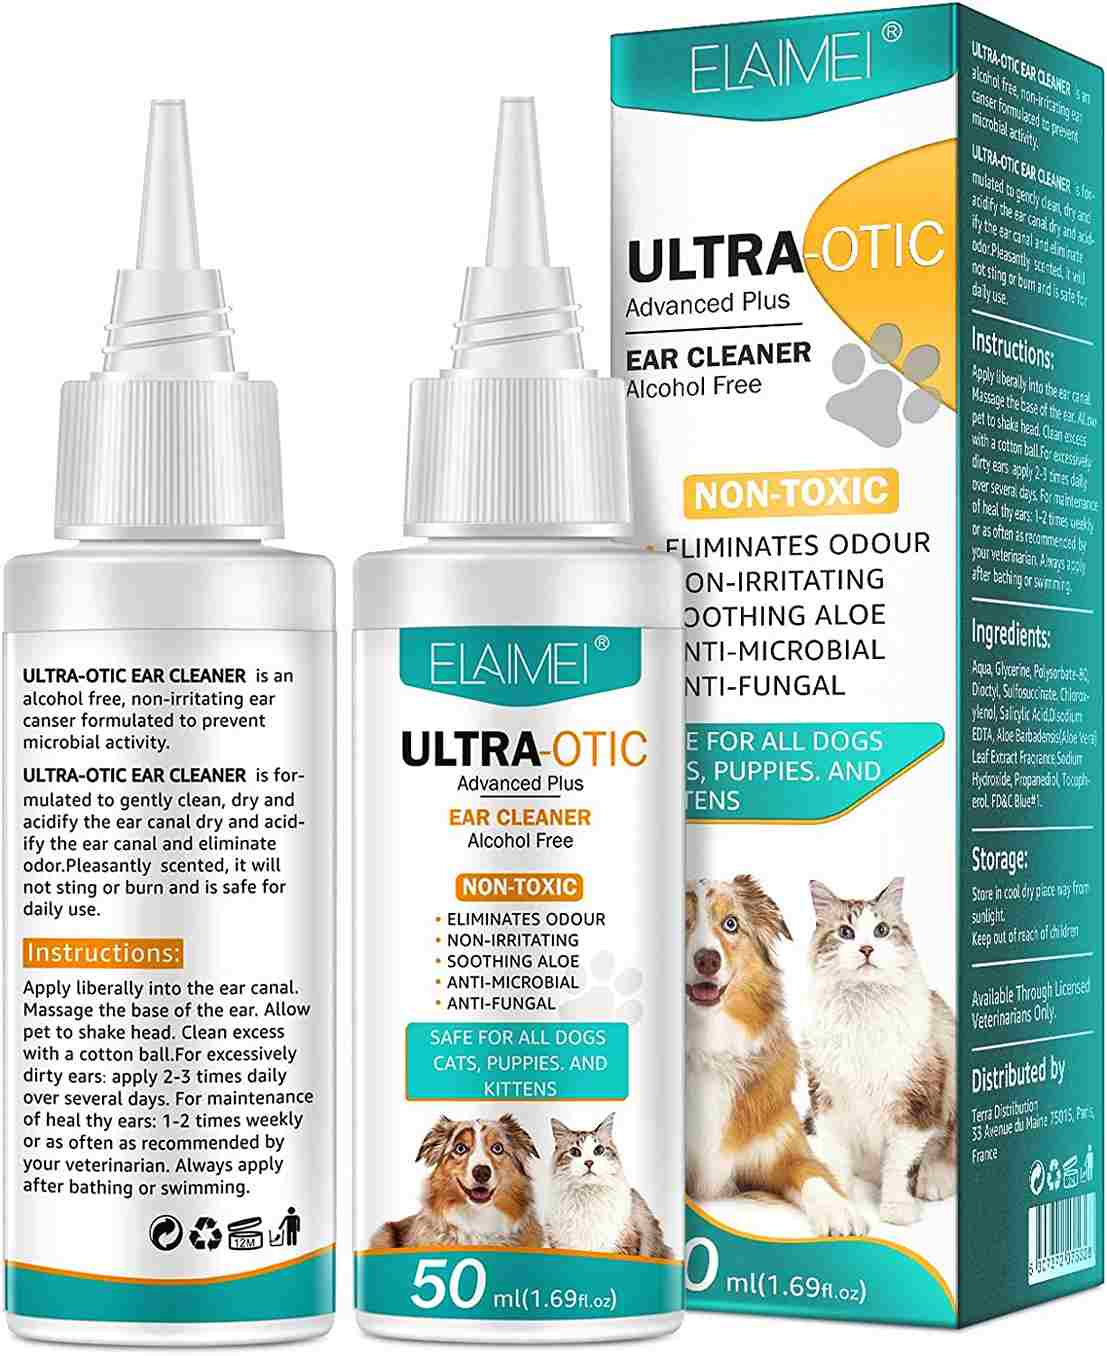 SUPSERSR Dog Ear Cleaner, Dog & Cat Ear Cleaning Solution,Pet Ear Wash Cleaner Stop Ear Itching, Infections Treatment & Controlling Odor